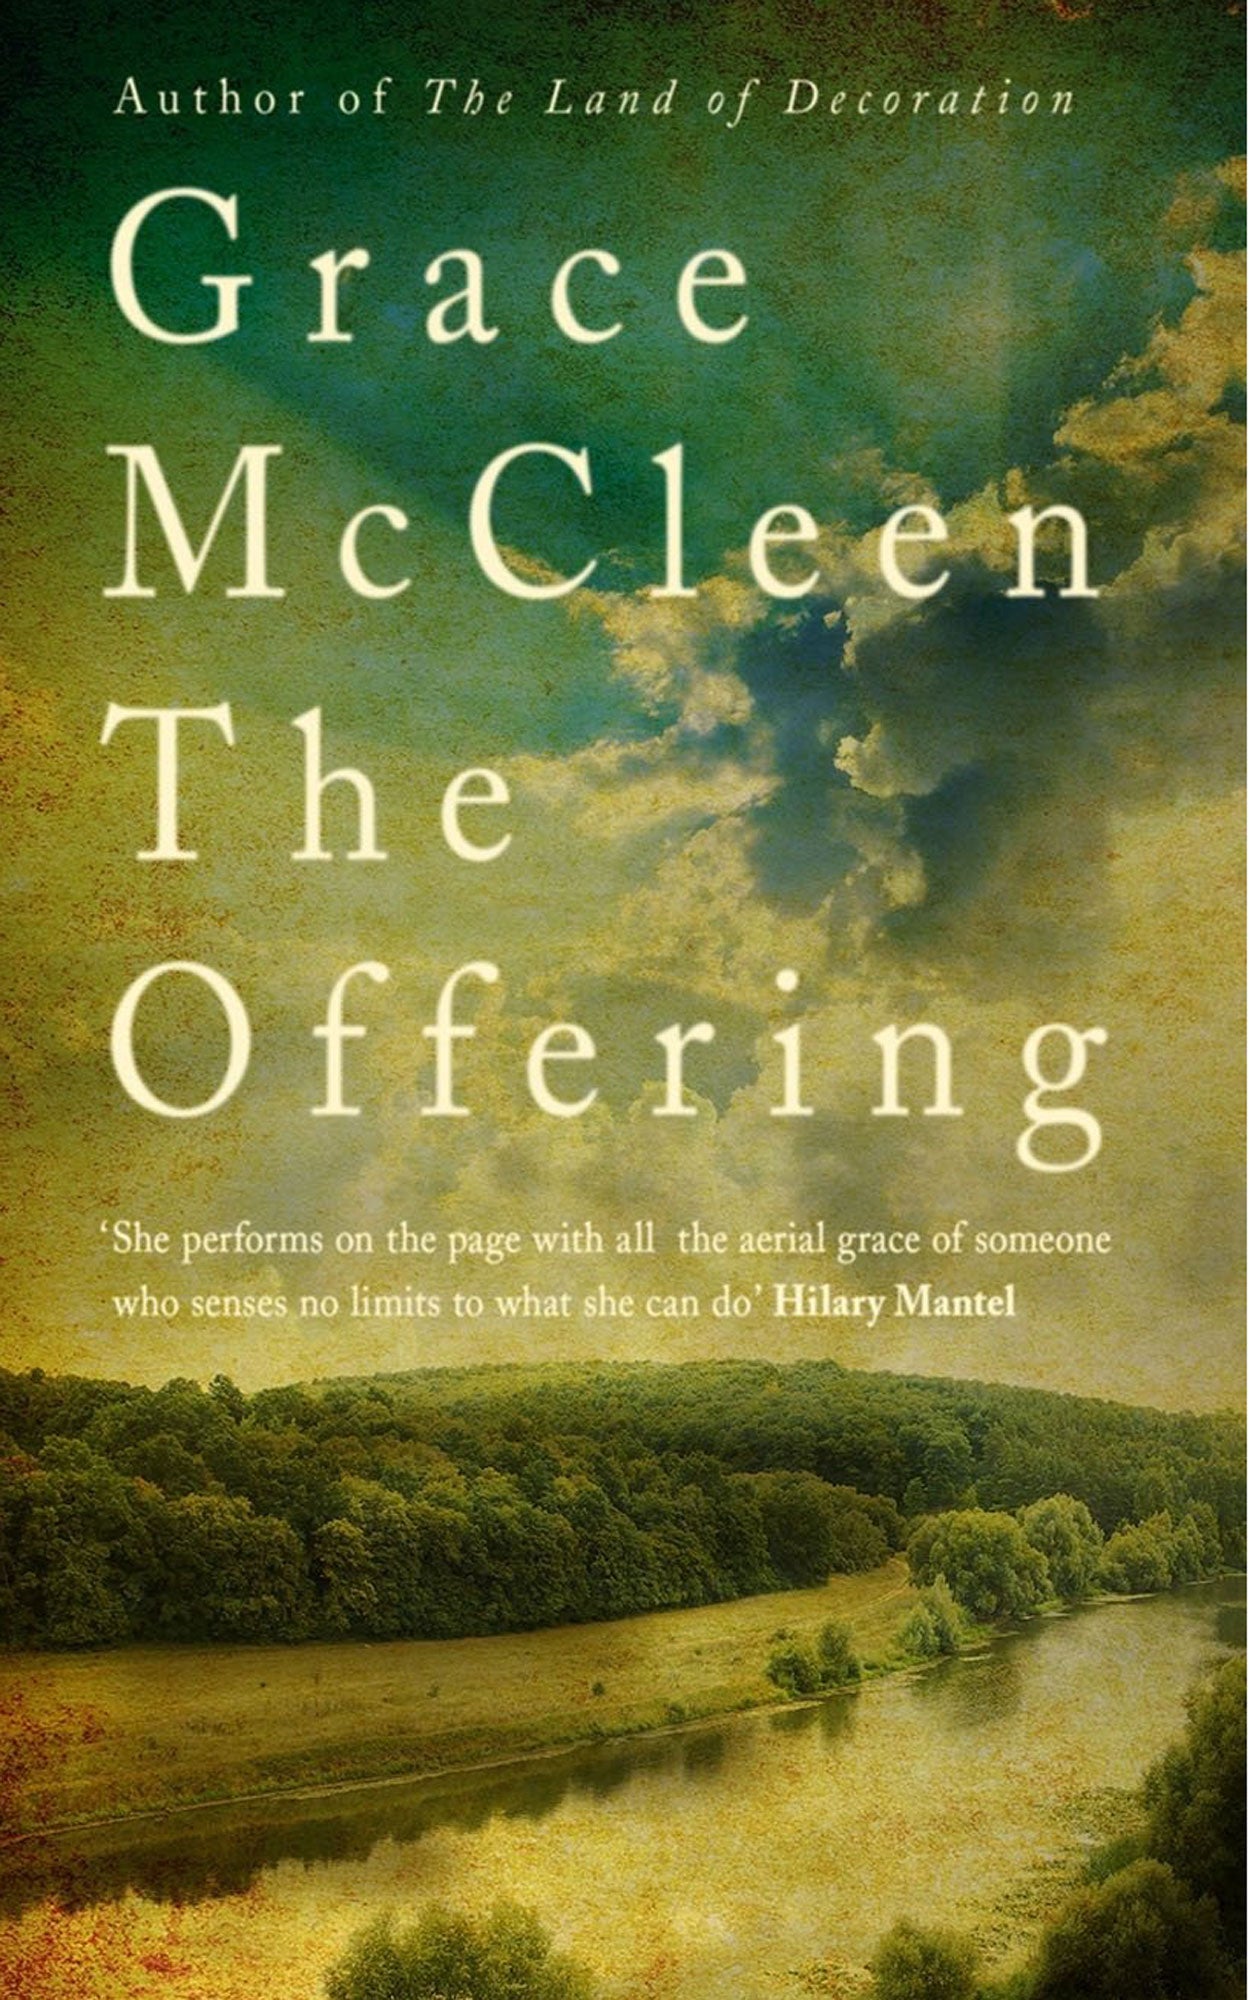 'The Offering' by Grace McCleen